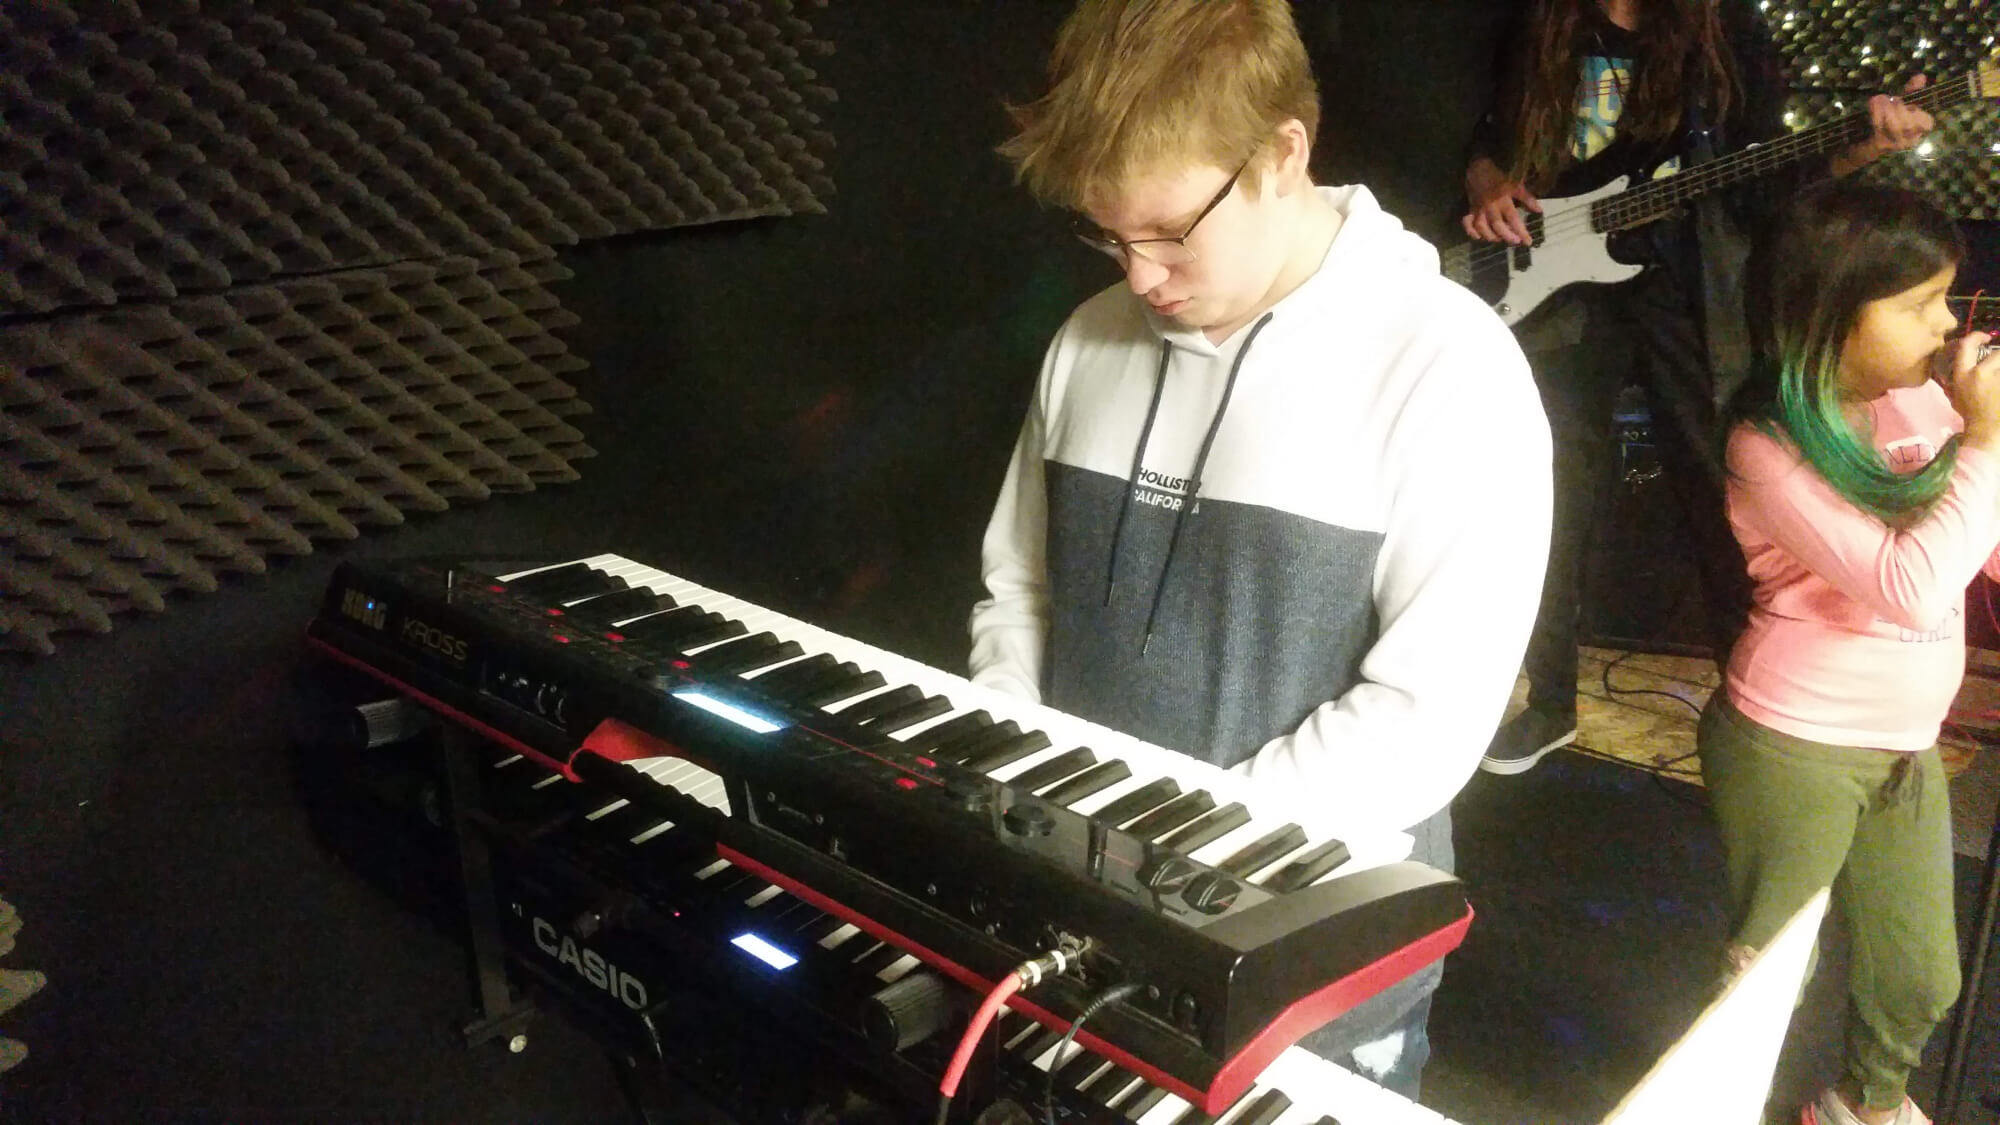 One of our students mastering the keys during rehearsal.